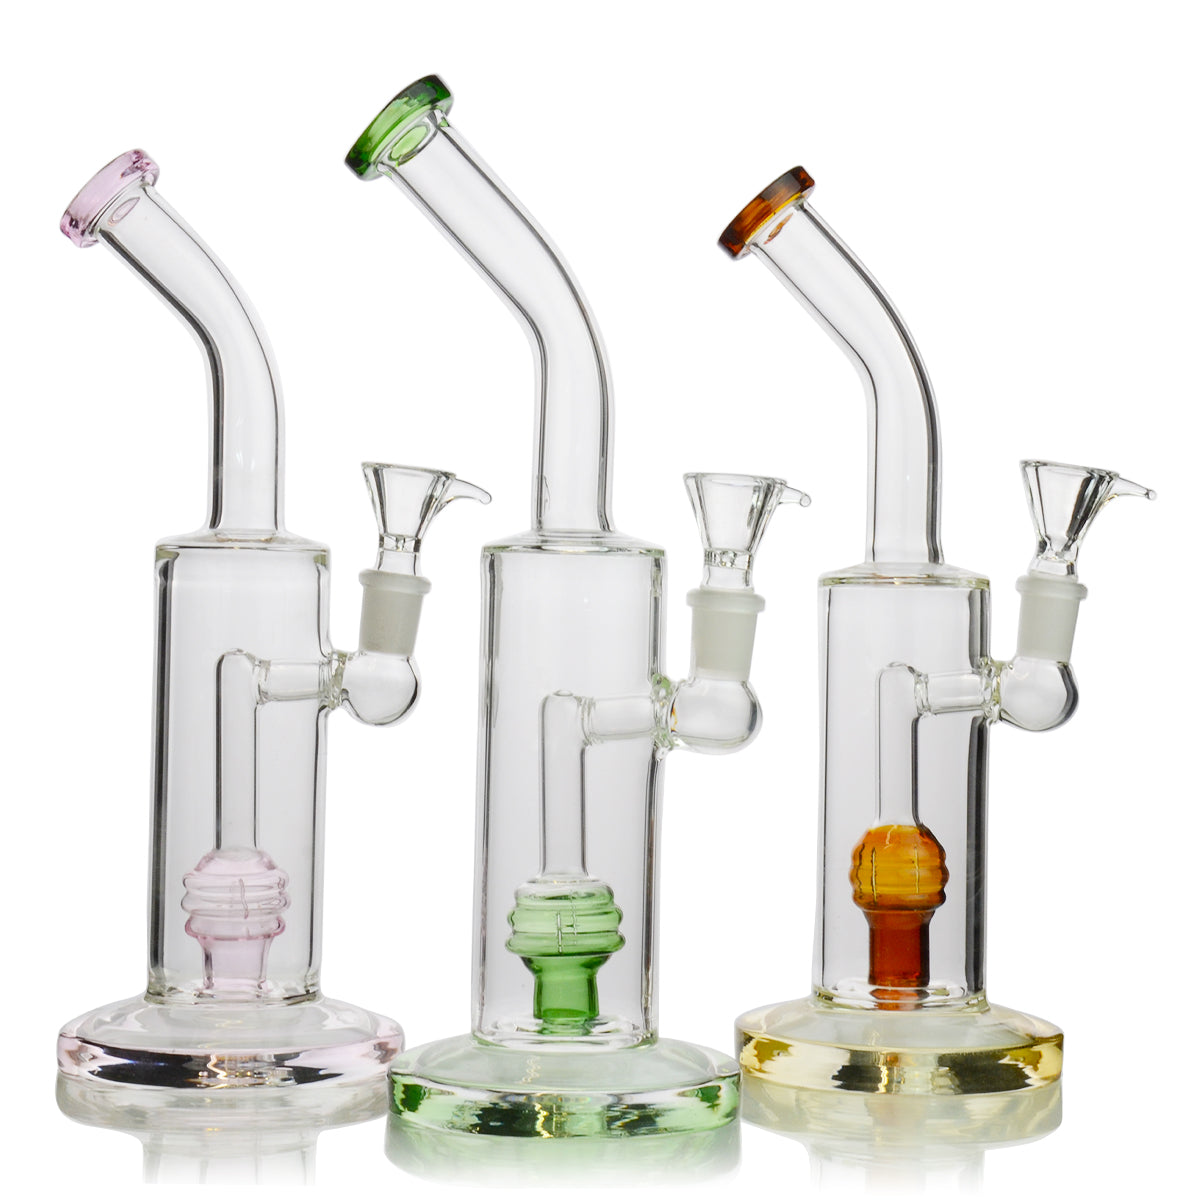 10'' Cylindrical Body with Shower perc 14mm Male Bowl Included Approx 365 Grams